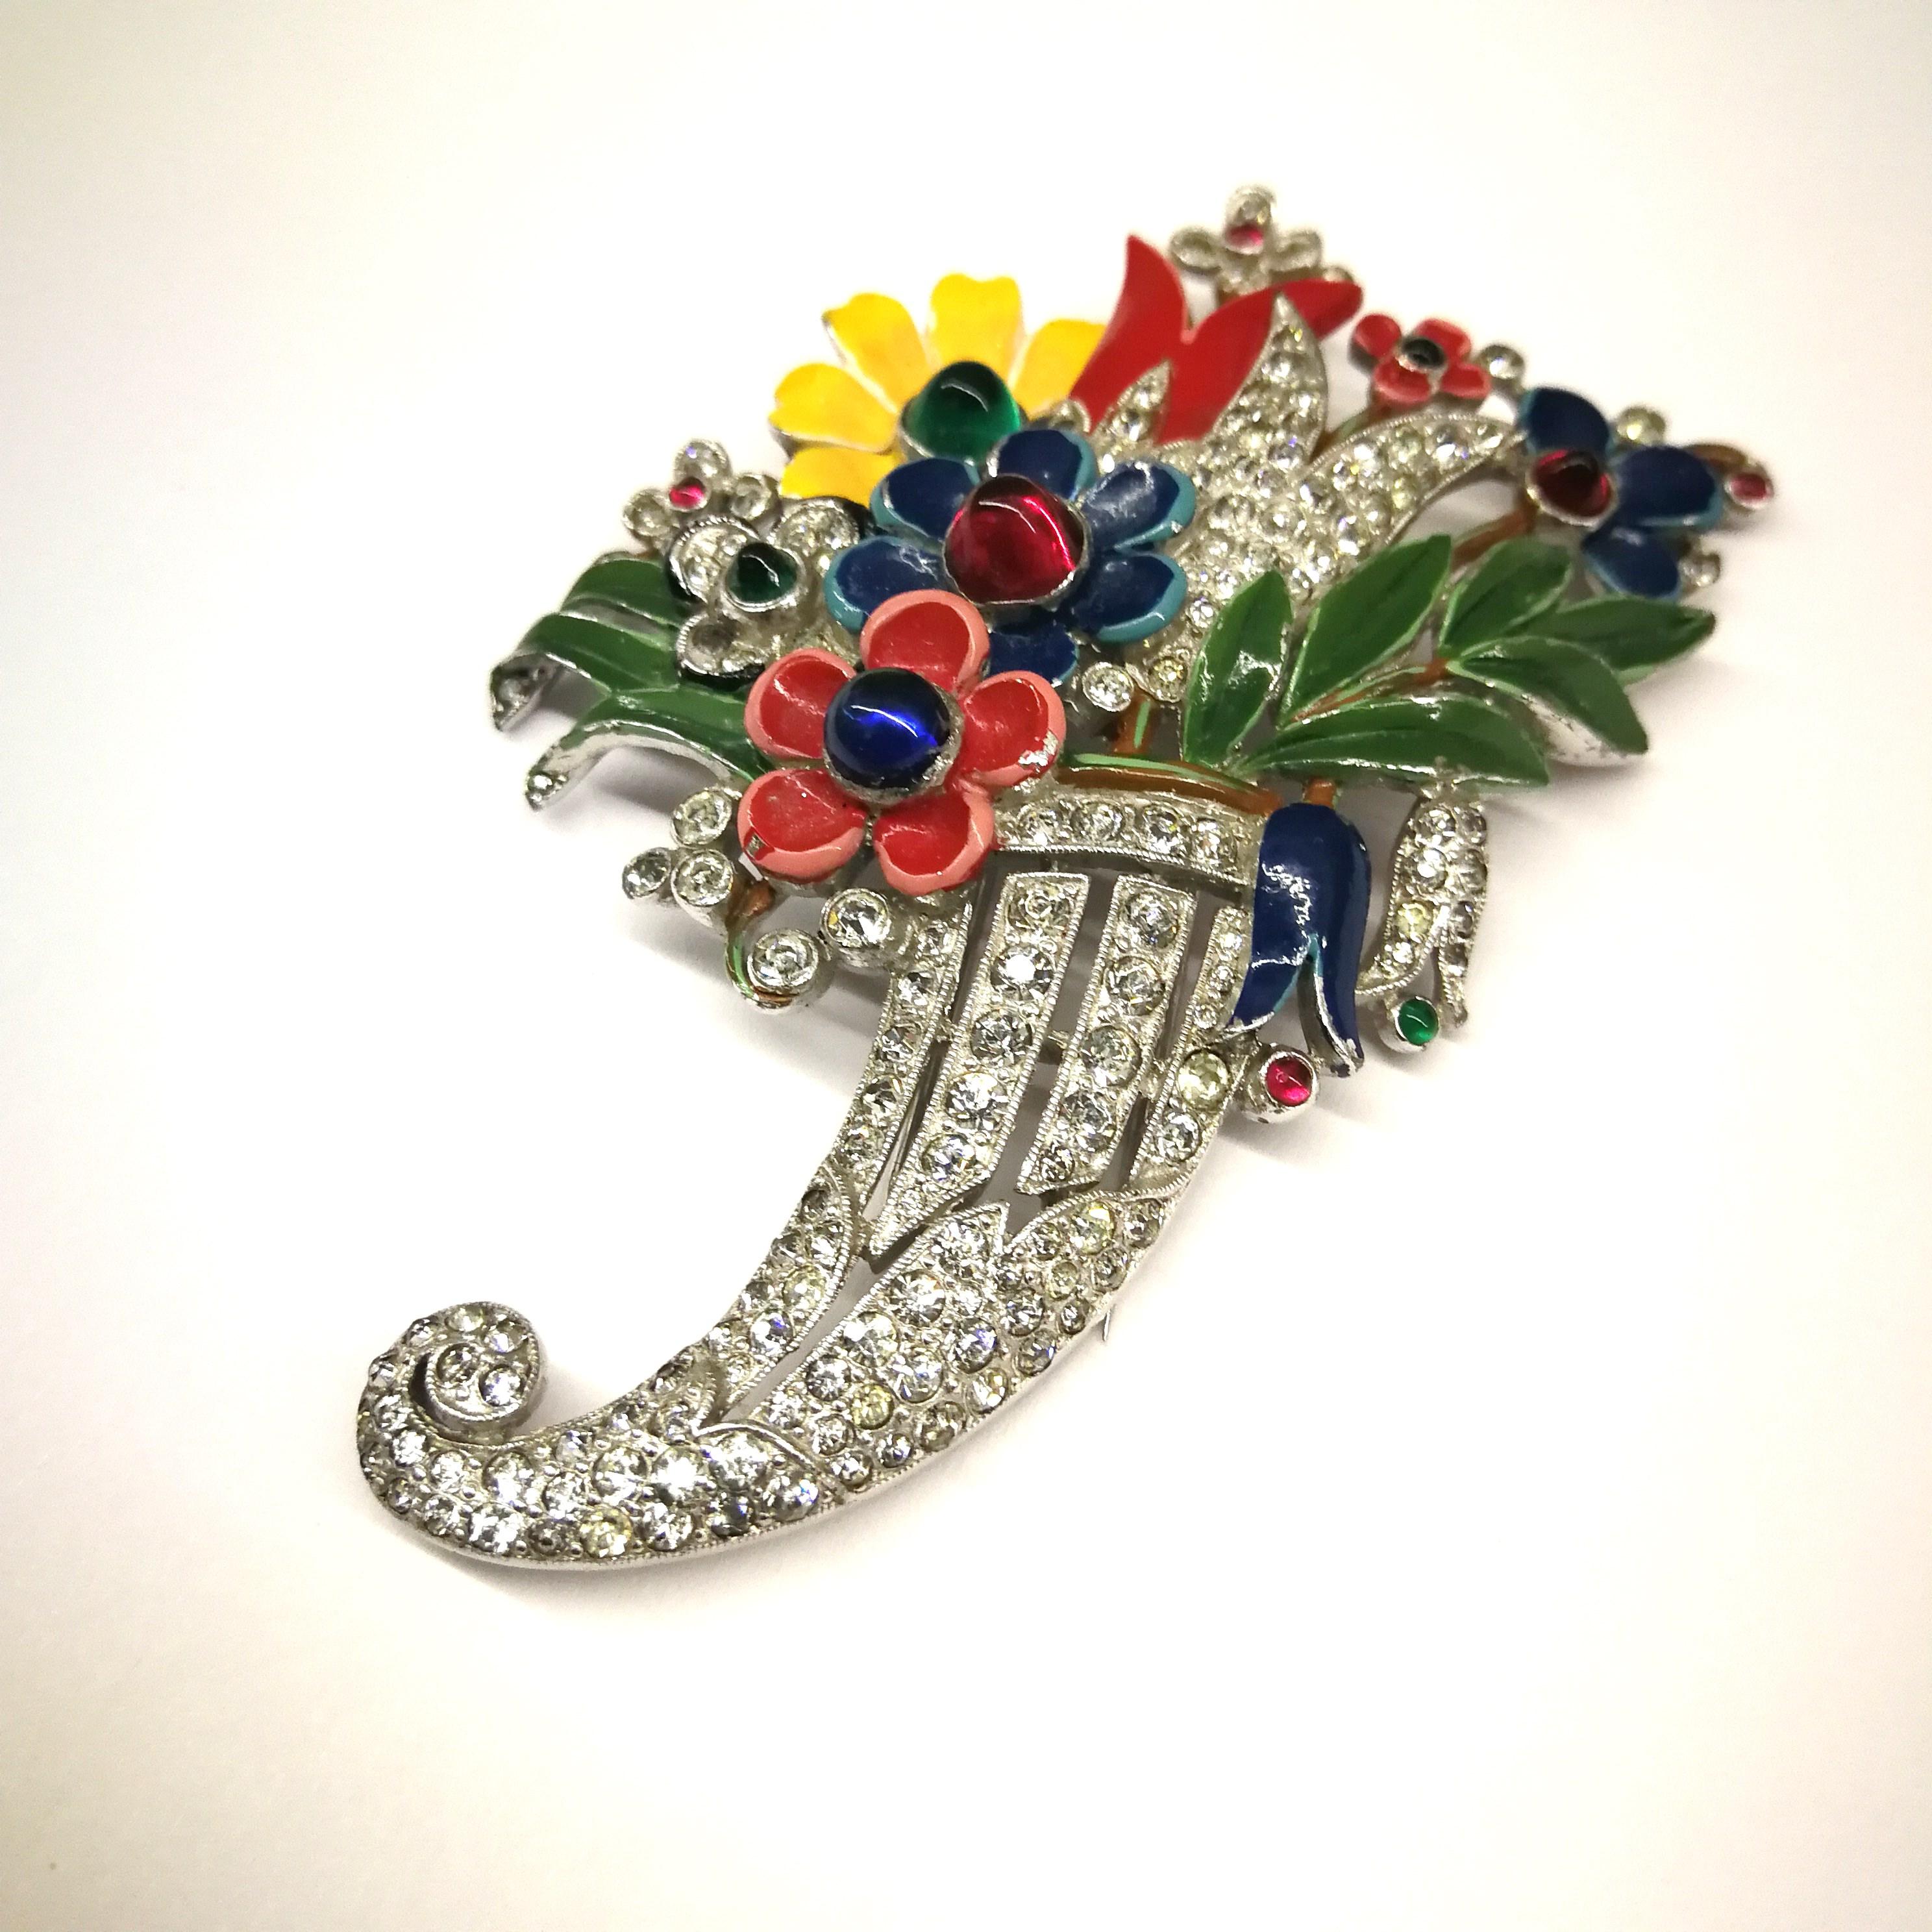 A rare and elegant enamelled brooch, from the 1930s, designed by Alfred Philippe for Trifari, in the form of an overflowing cornucopia, with flowers and leaves in beautiful fresh enamelled colours, highlighted by coloured paste cabuchons, the main